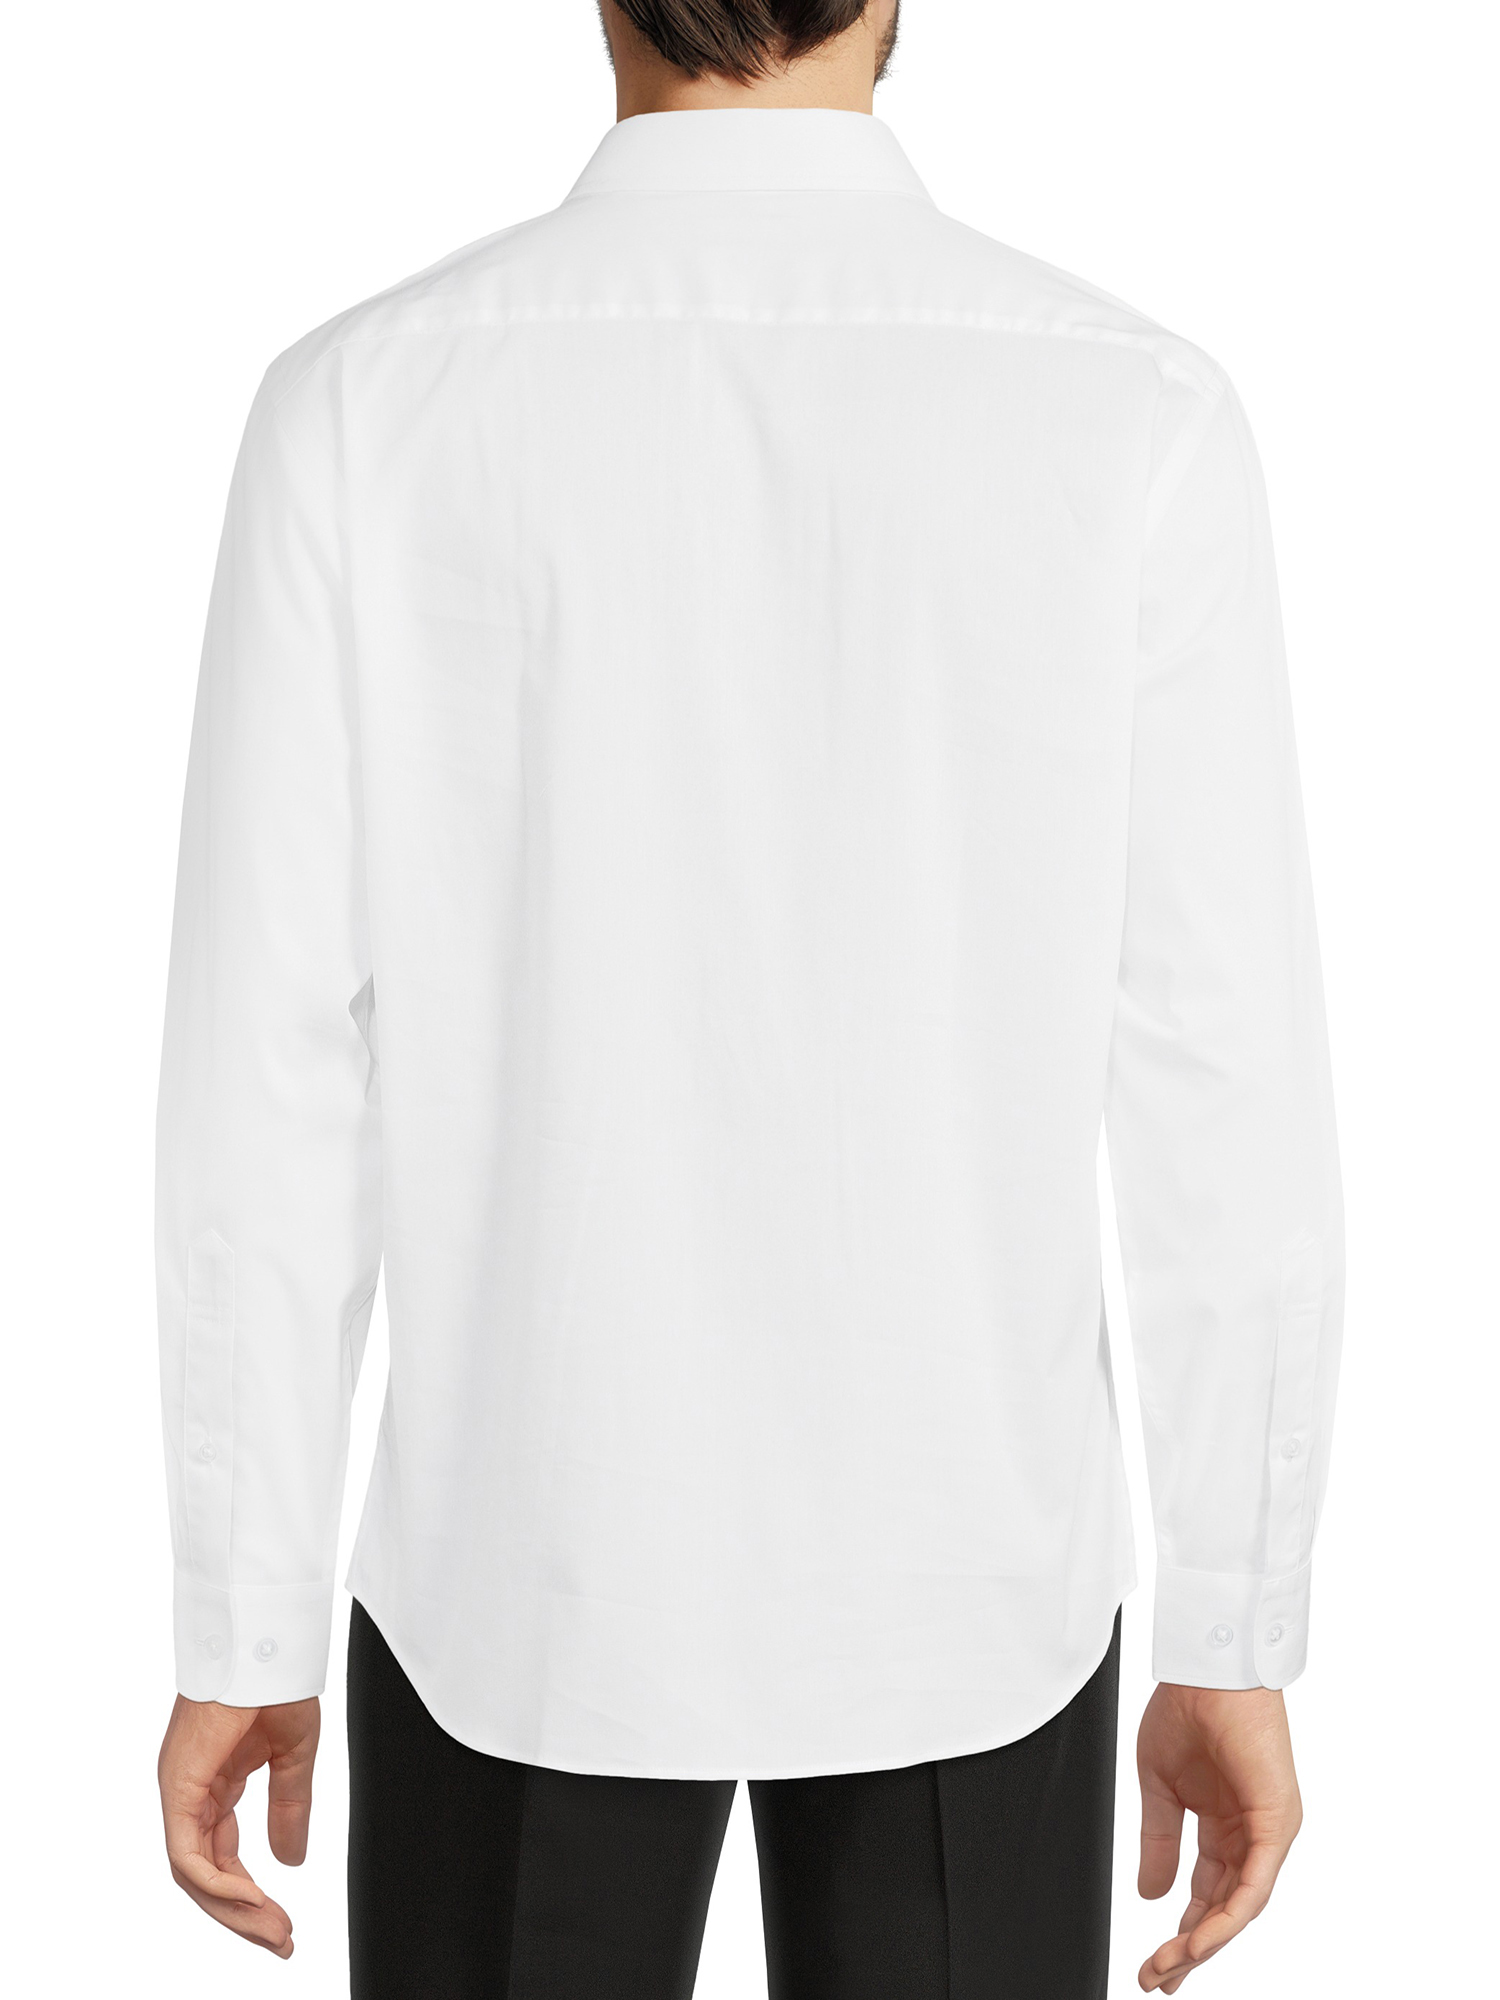 George Men's Classic Dress Shirt with Long Sleeves, Sizes S-3XL - image 3 of 5